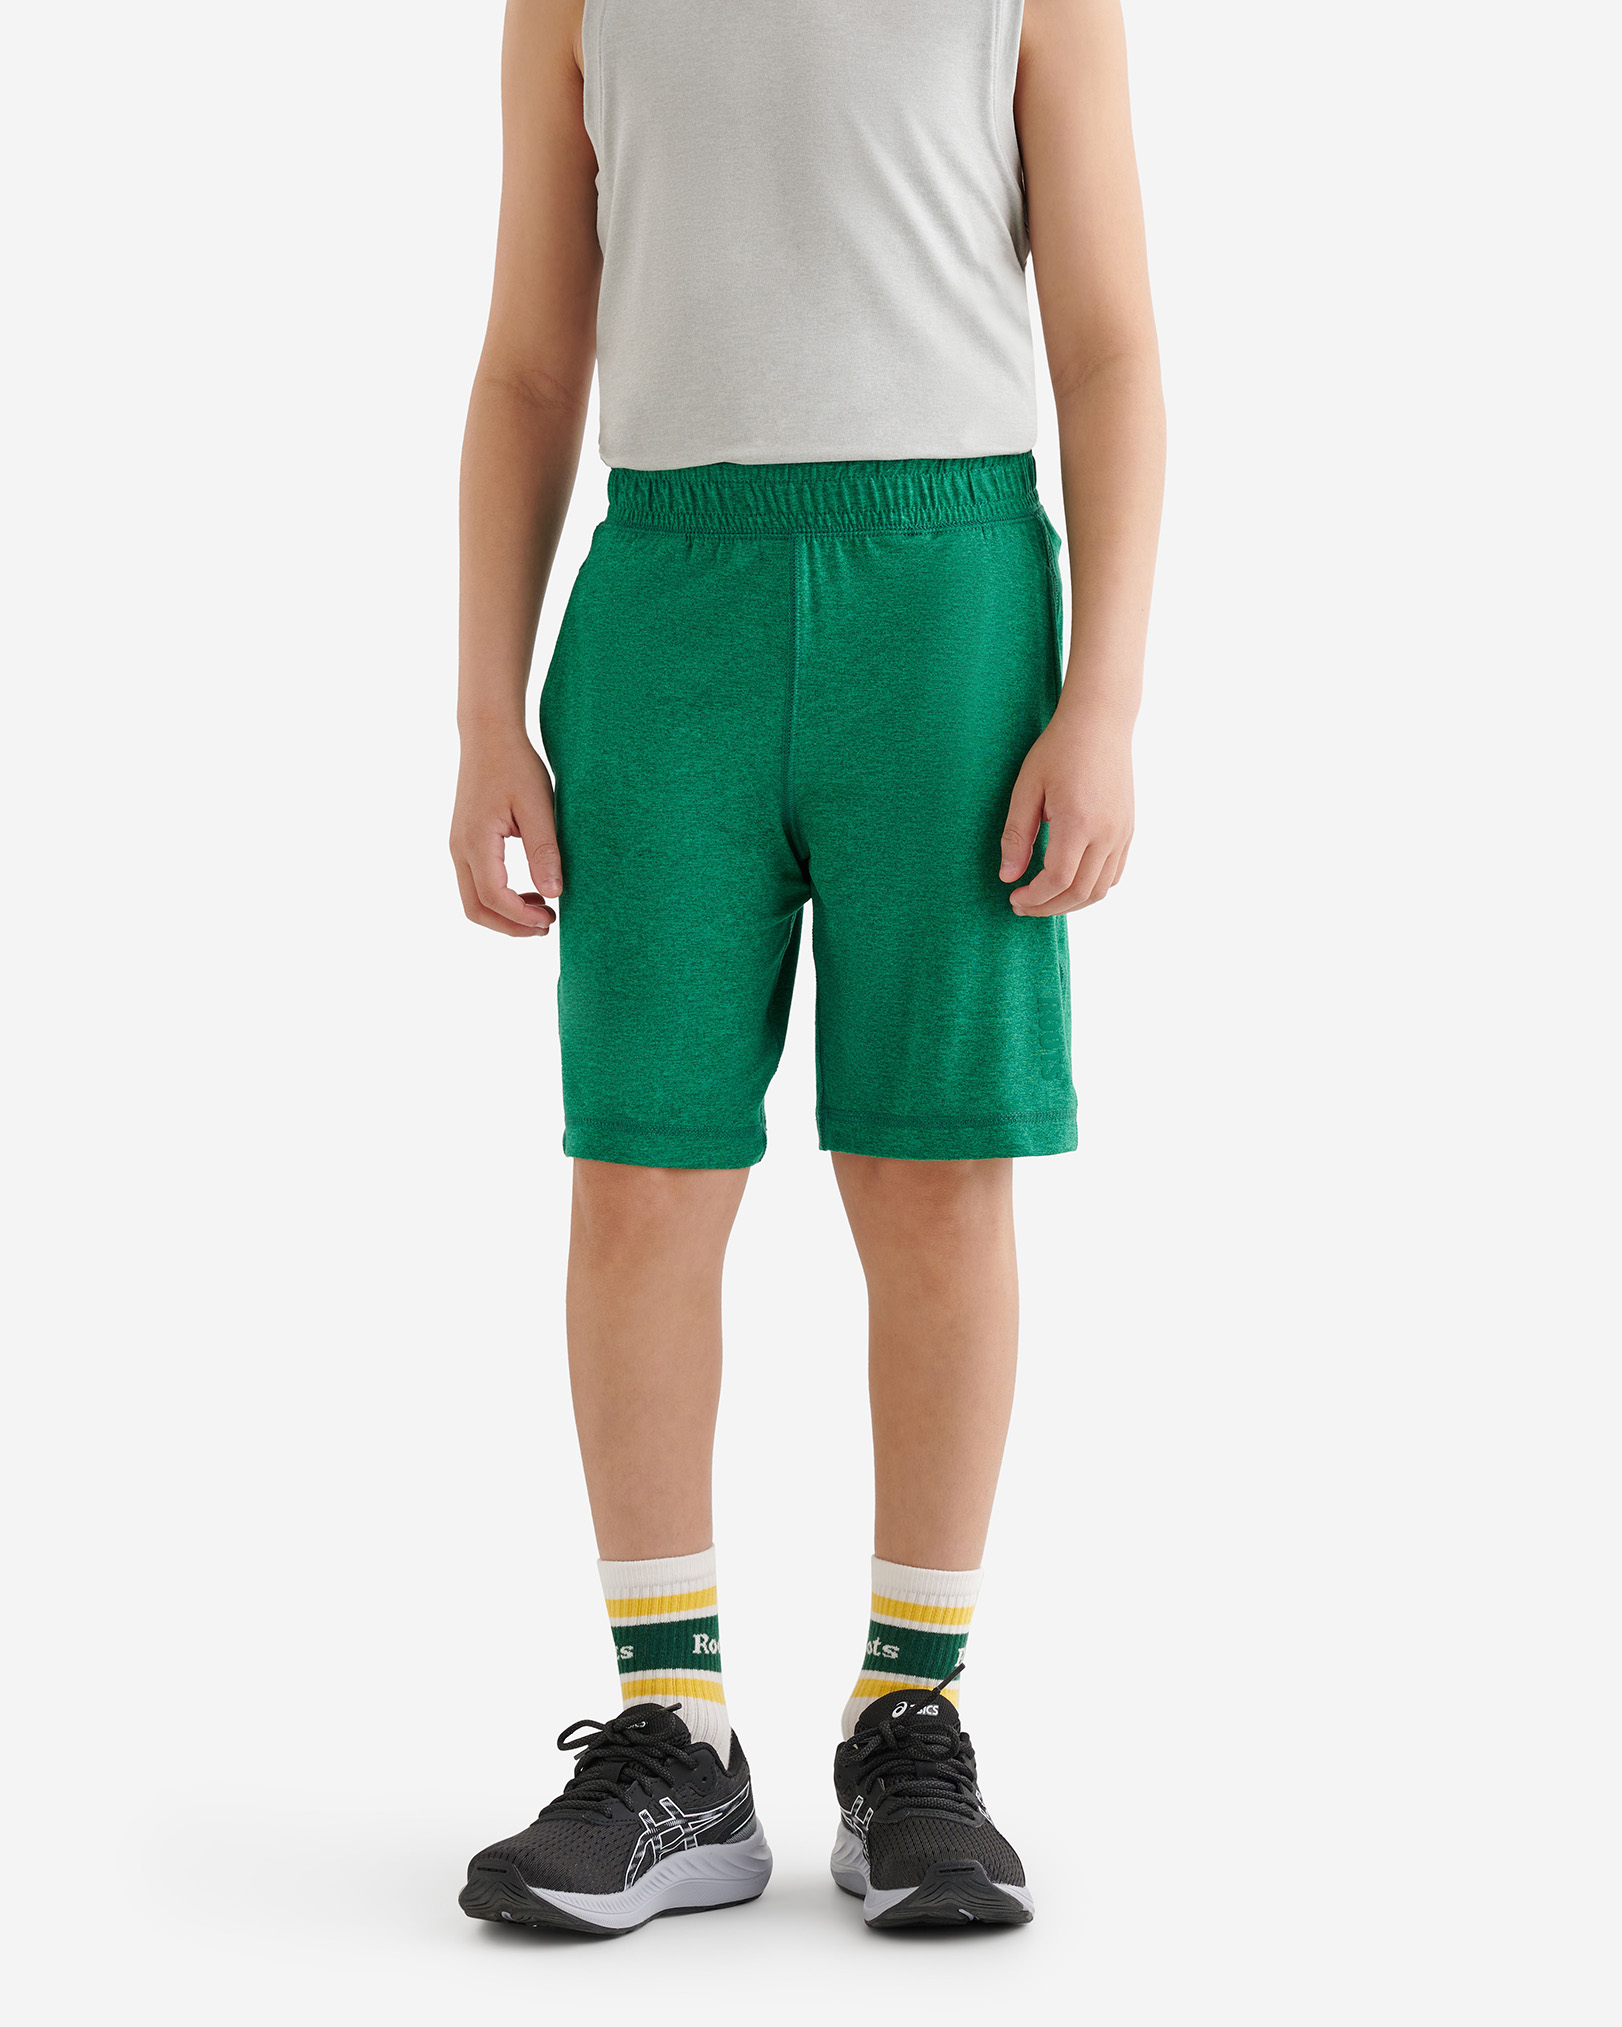 Roots Boy's Active Essential Short in Green Jacket Pepper